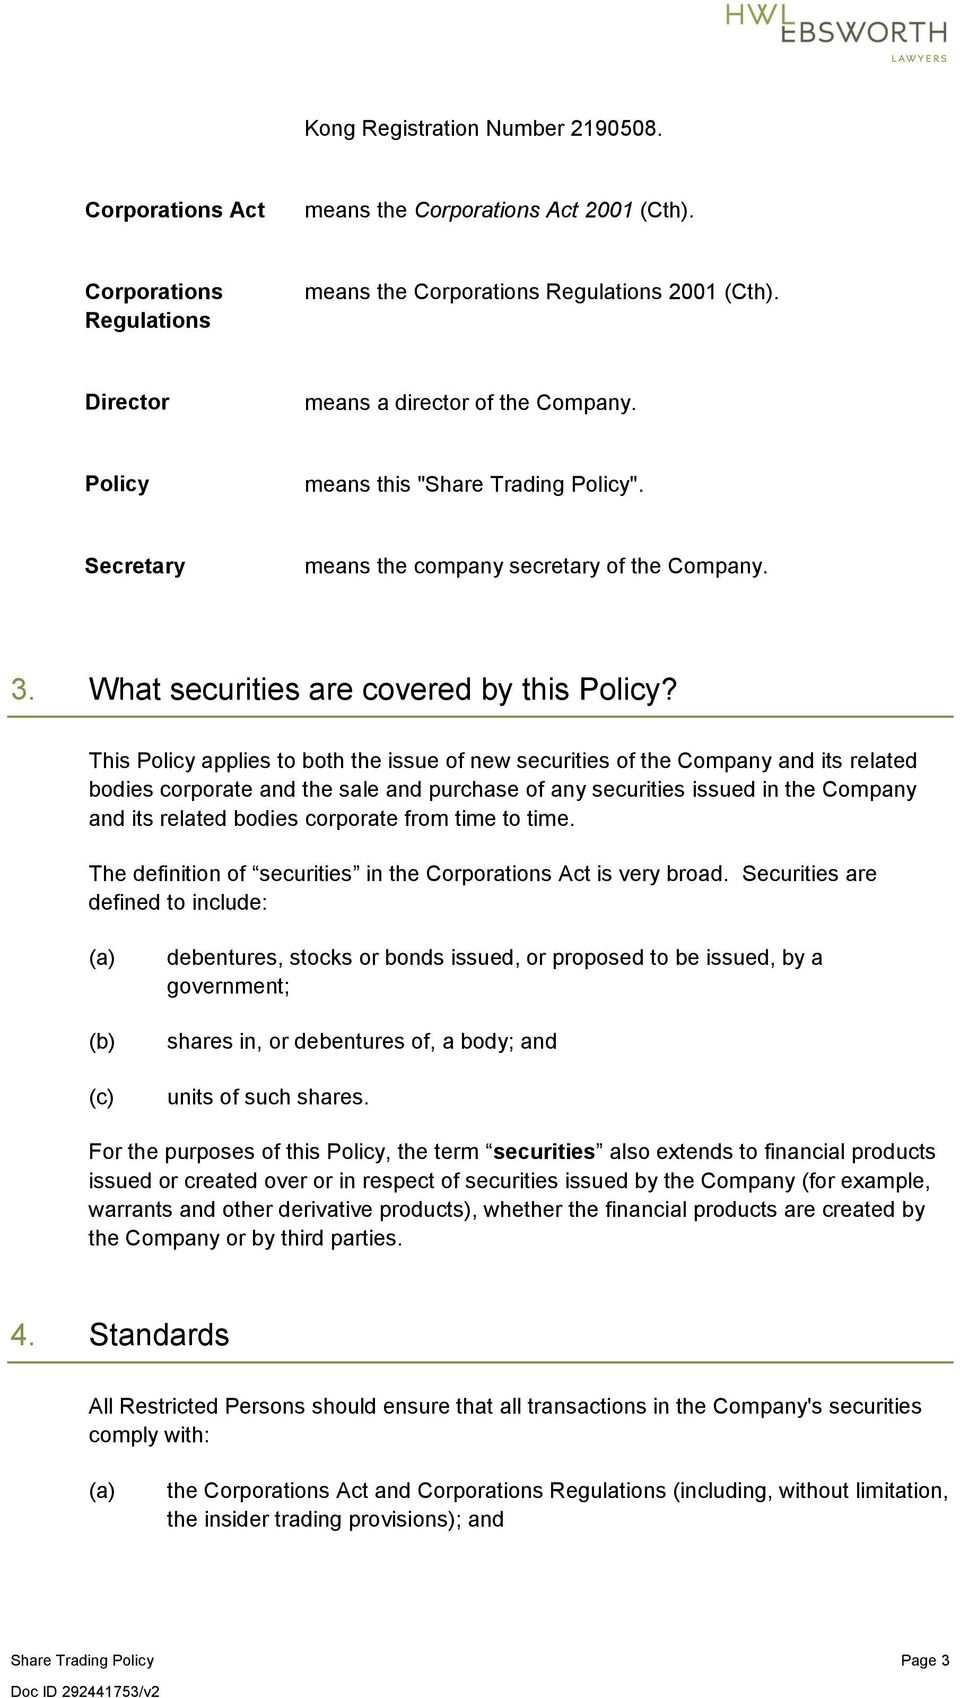 This Policy applies to both the issue of new securities of the Company and its related bodies corporate and the sale and purchase of any securities issued in the Company and its related bodies